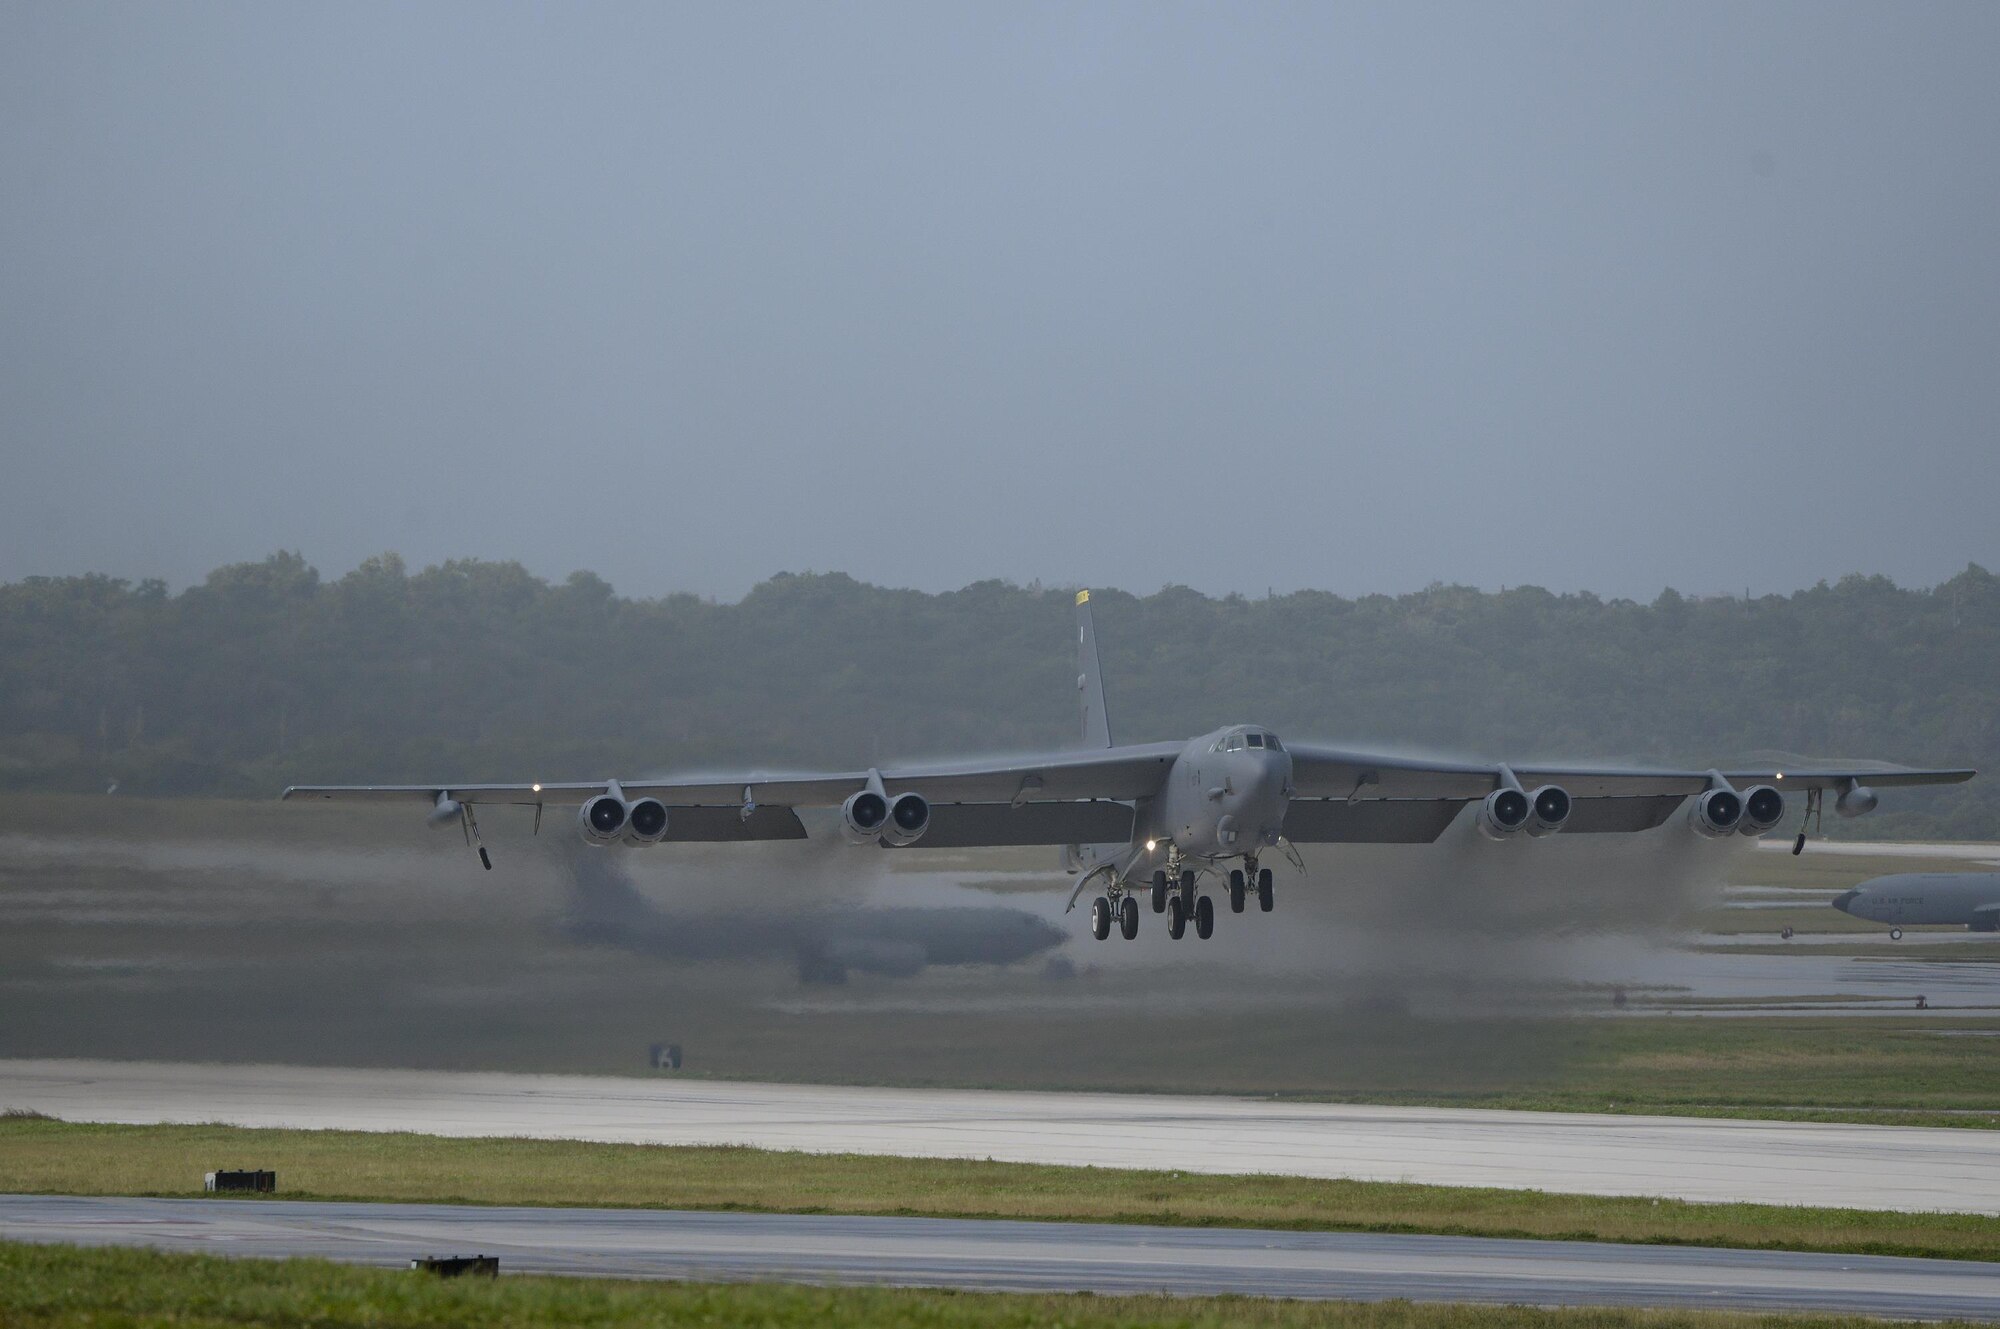 A U.S. Air Force B-52 Stratofortress takes off from Andersen Air Force Base, Guam, after a short deployment Dec. 17, 2016. This short-term deployment helped ensure the bomber crews maintain a high state of readiness and crew proficiency, and provided opportunities to integrate capabilities with regional partners in the Indo-Asia-Pacific region. (U.S. Air Force photo by Staff Sgt. Benjamin Gonsier/Released)